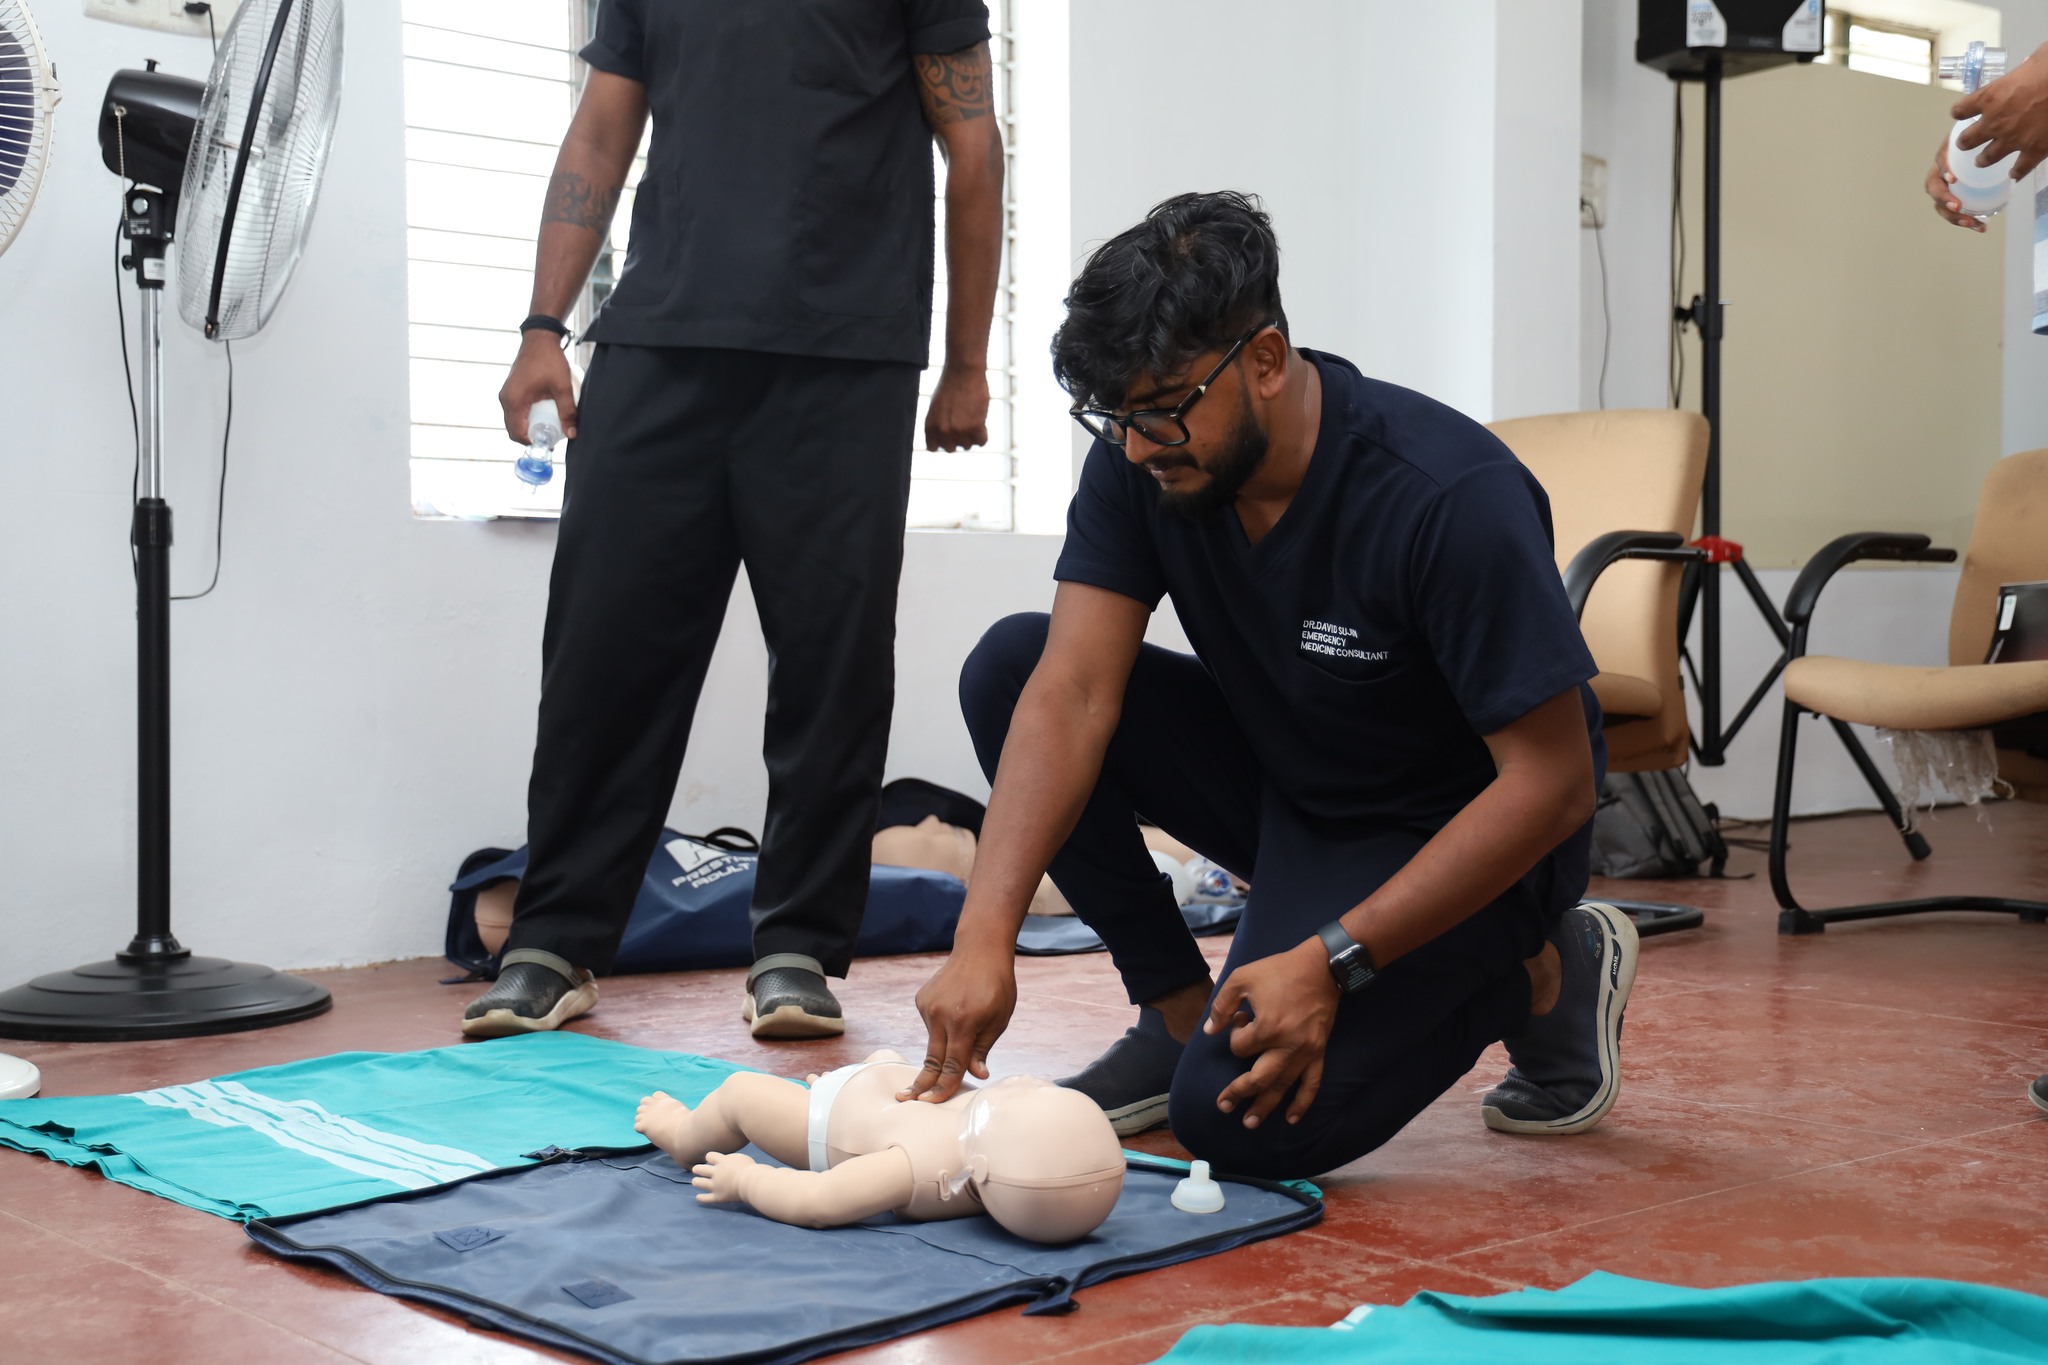 BLS Training with American Heart Association